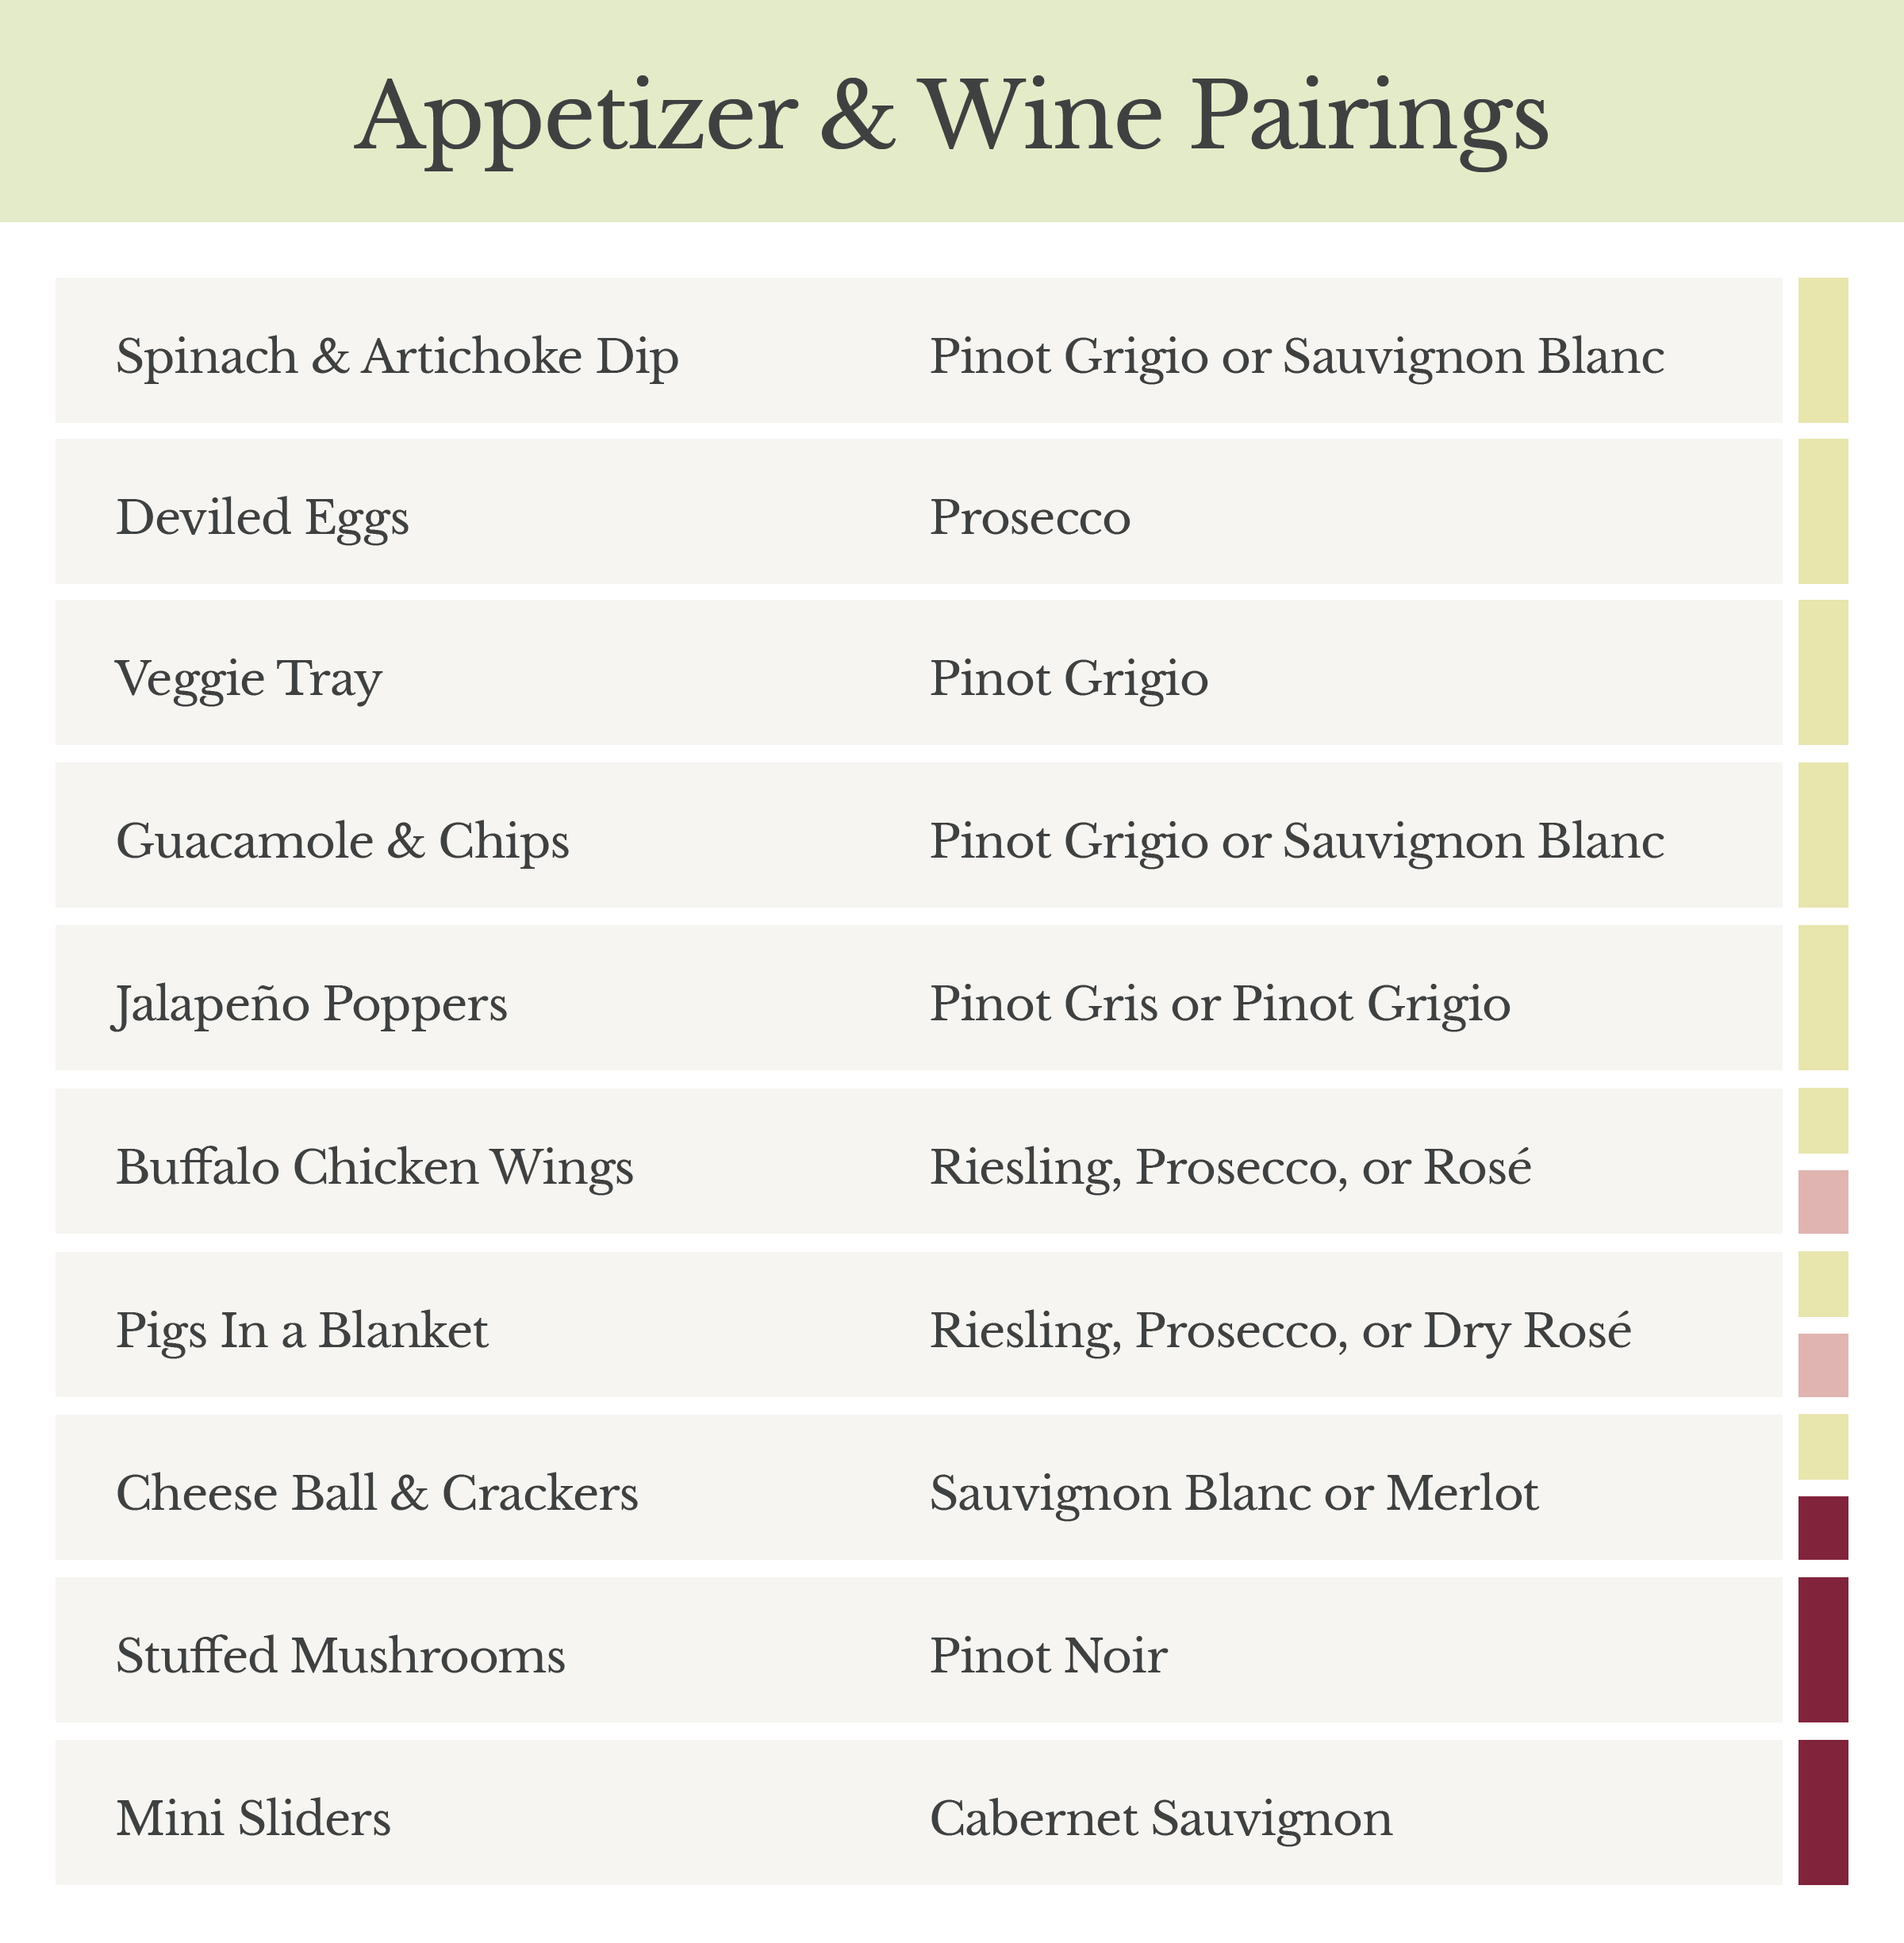 Appetizer and Wine Pairings Chart